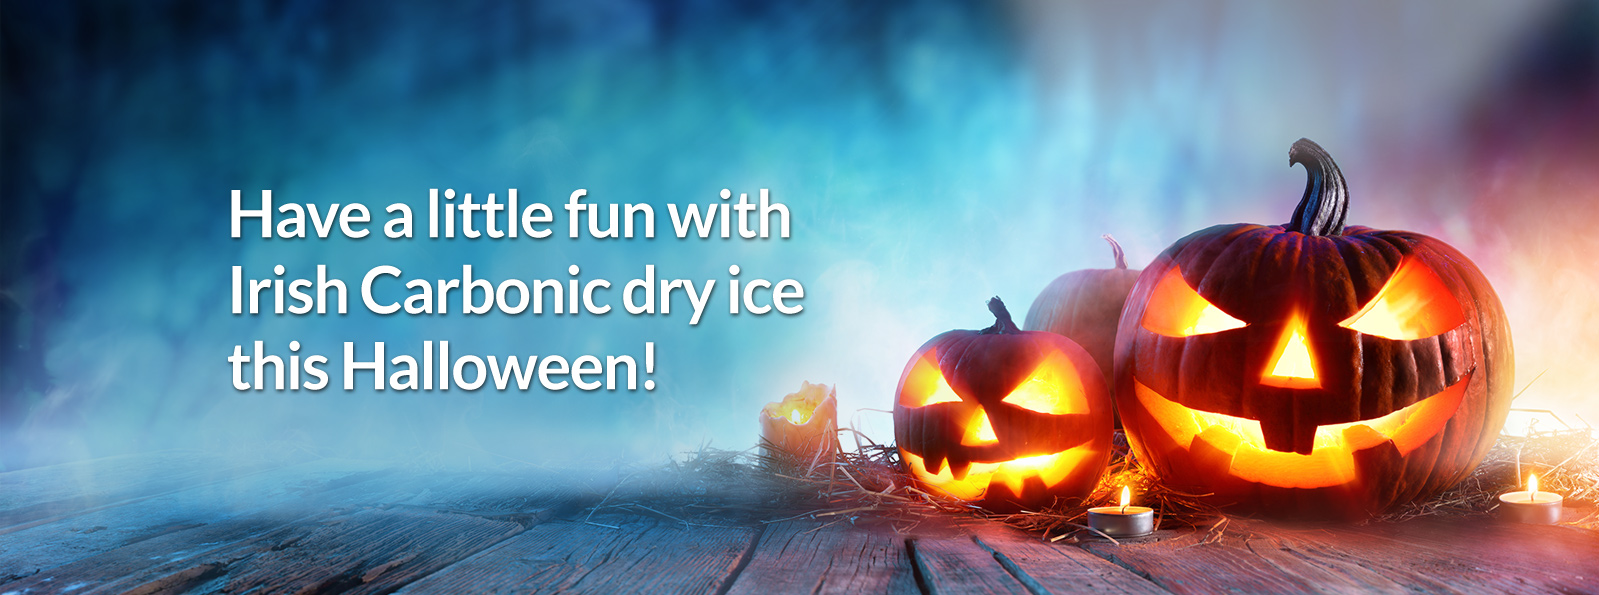 How to Buy Dry Ice for Halloween and Handle It Safely